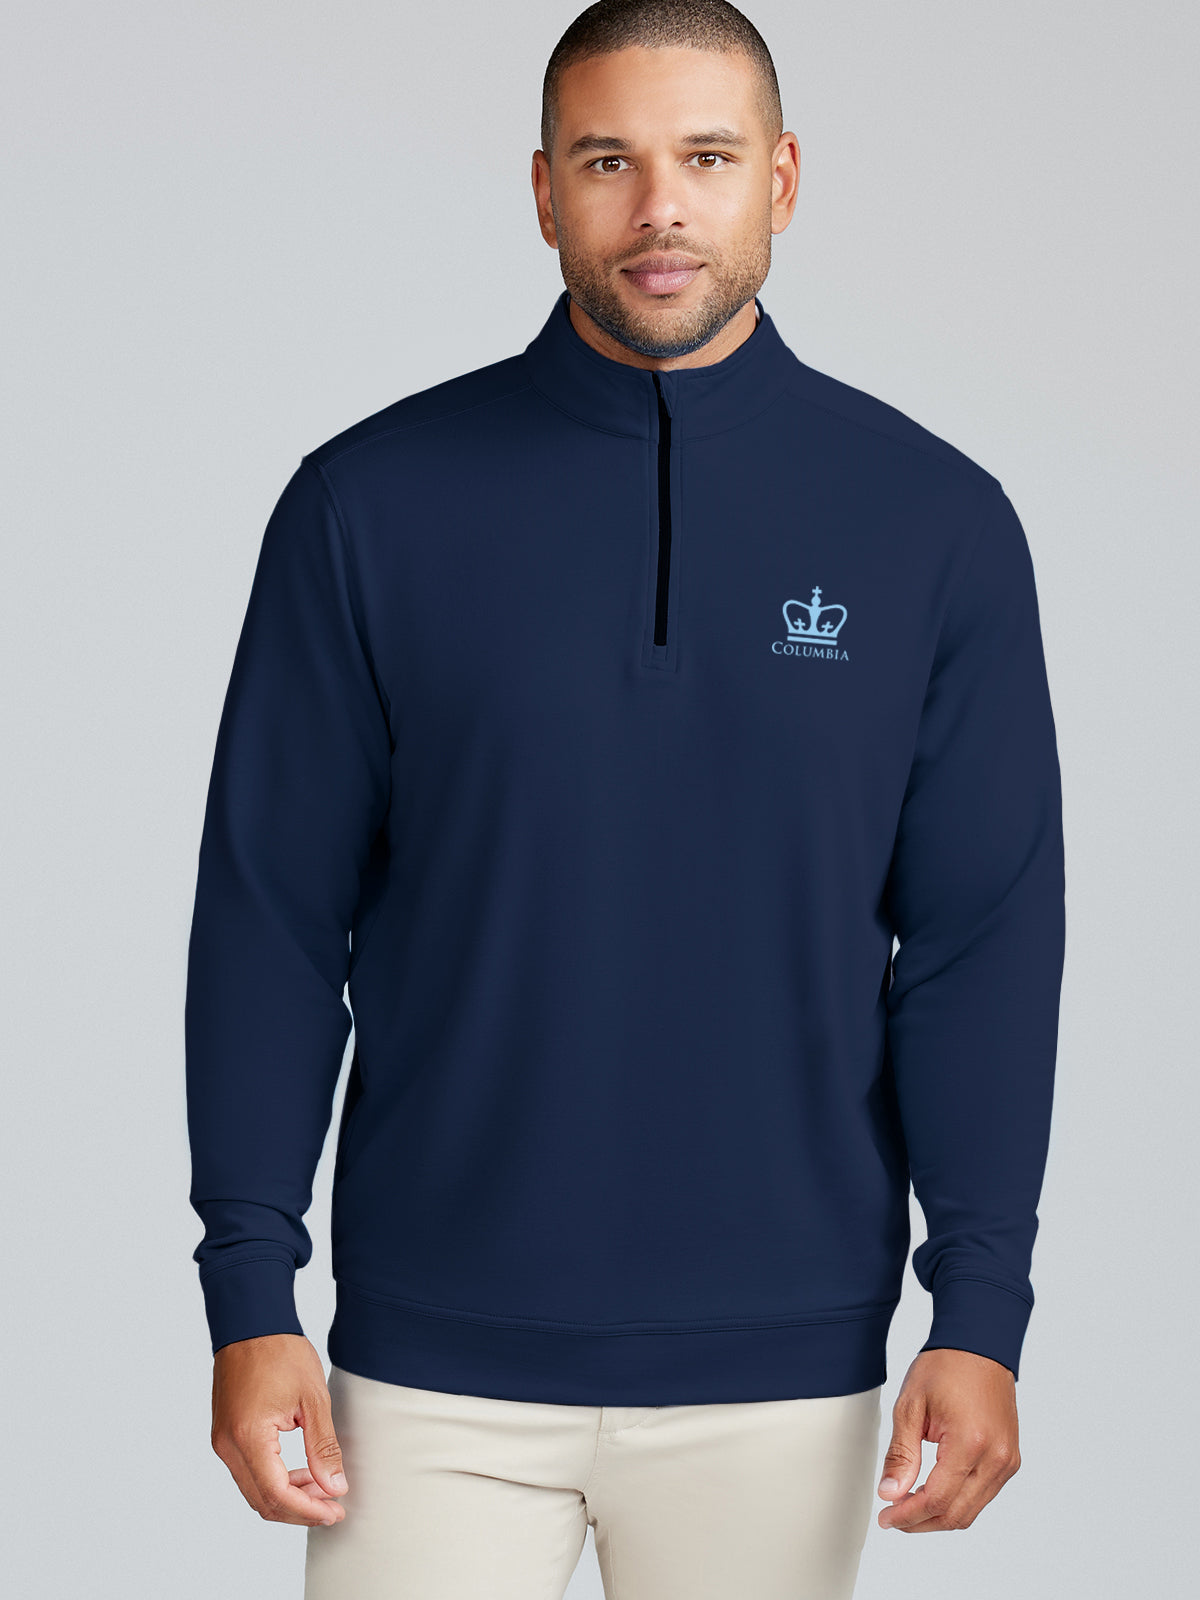 Cloud French Terry Quarter Zip - Columbia - tasc Performance (ClassicNavy)